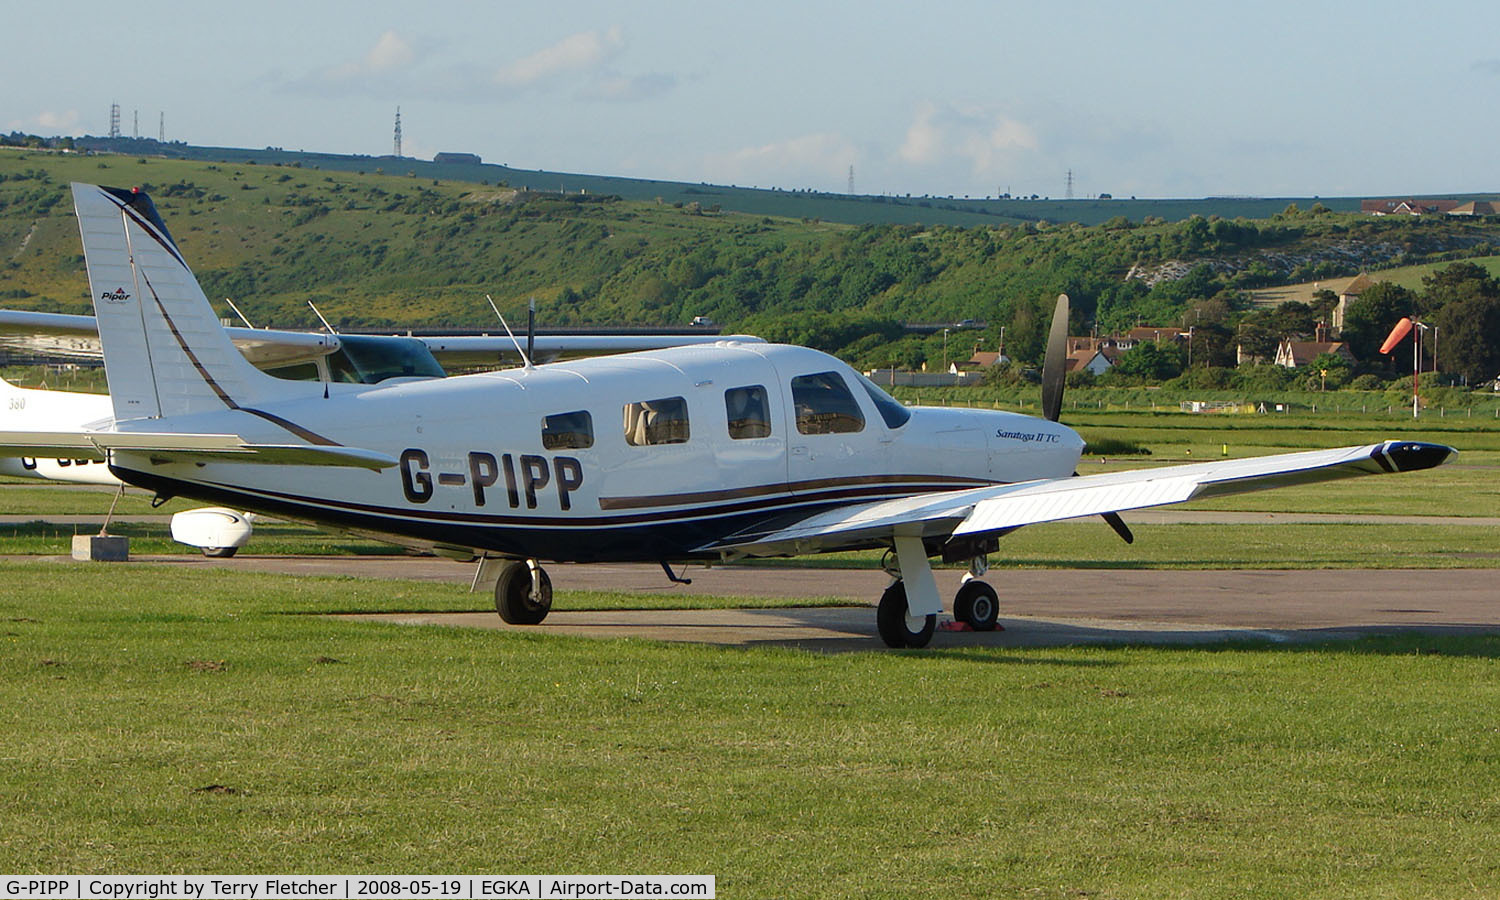 G-PIPP, 2007 Piper PA-32R-301T Turbo Saratoga C/N 3257454, A pleasant May evening at Shoreham Airport , Sussex , UK